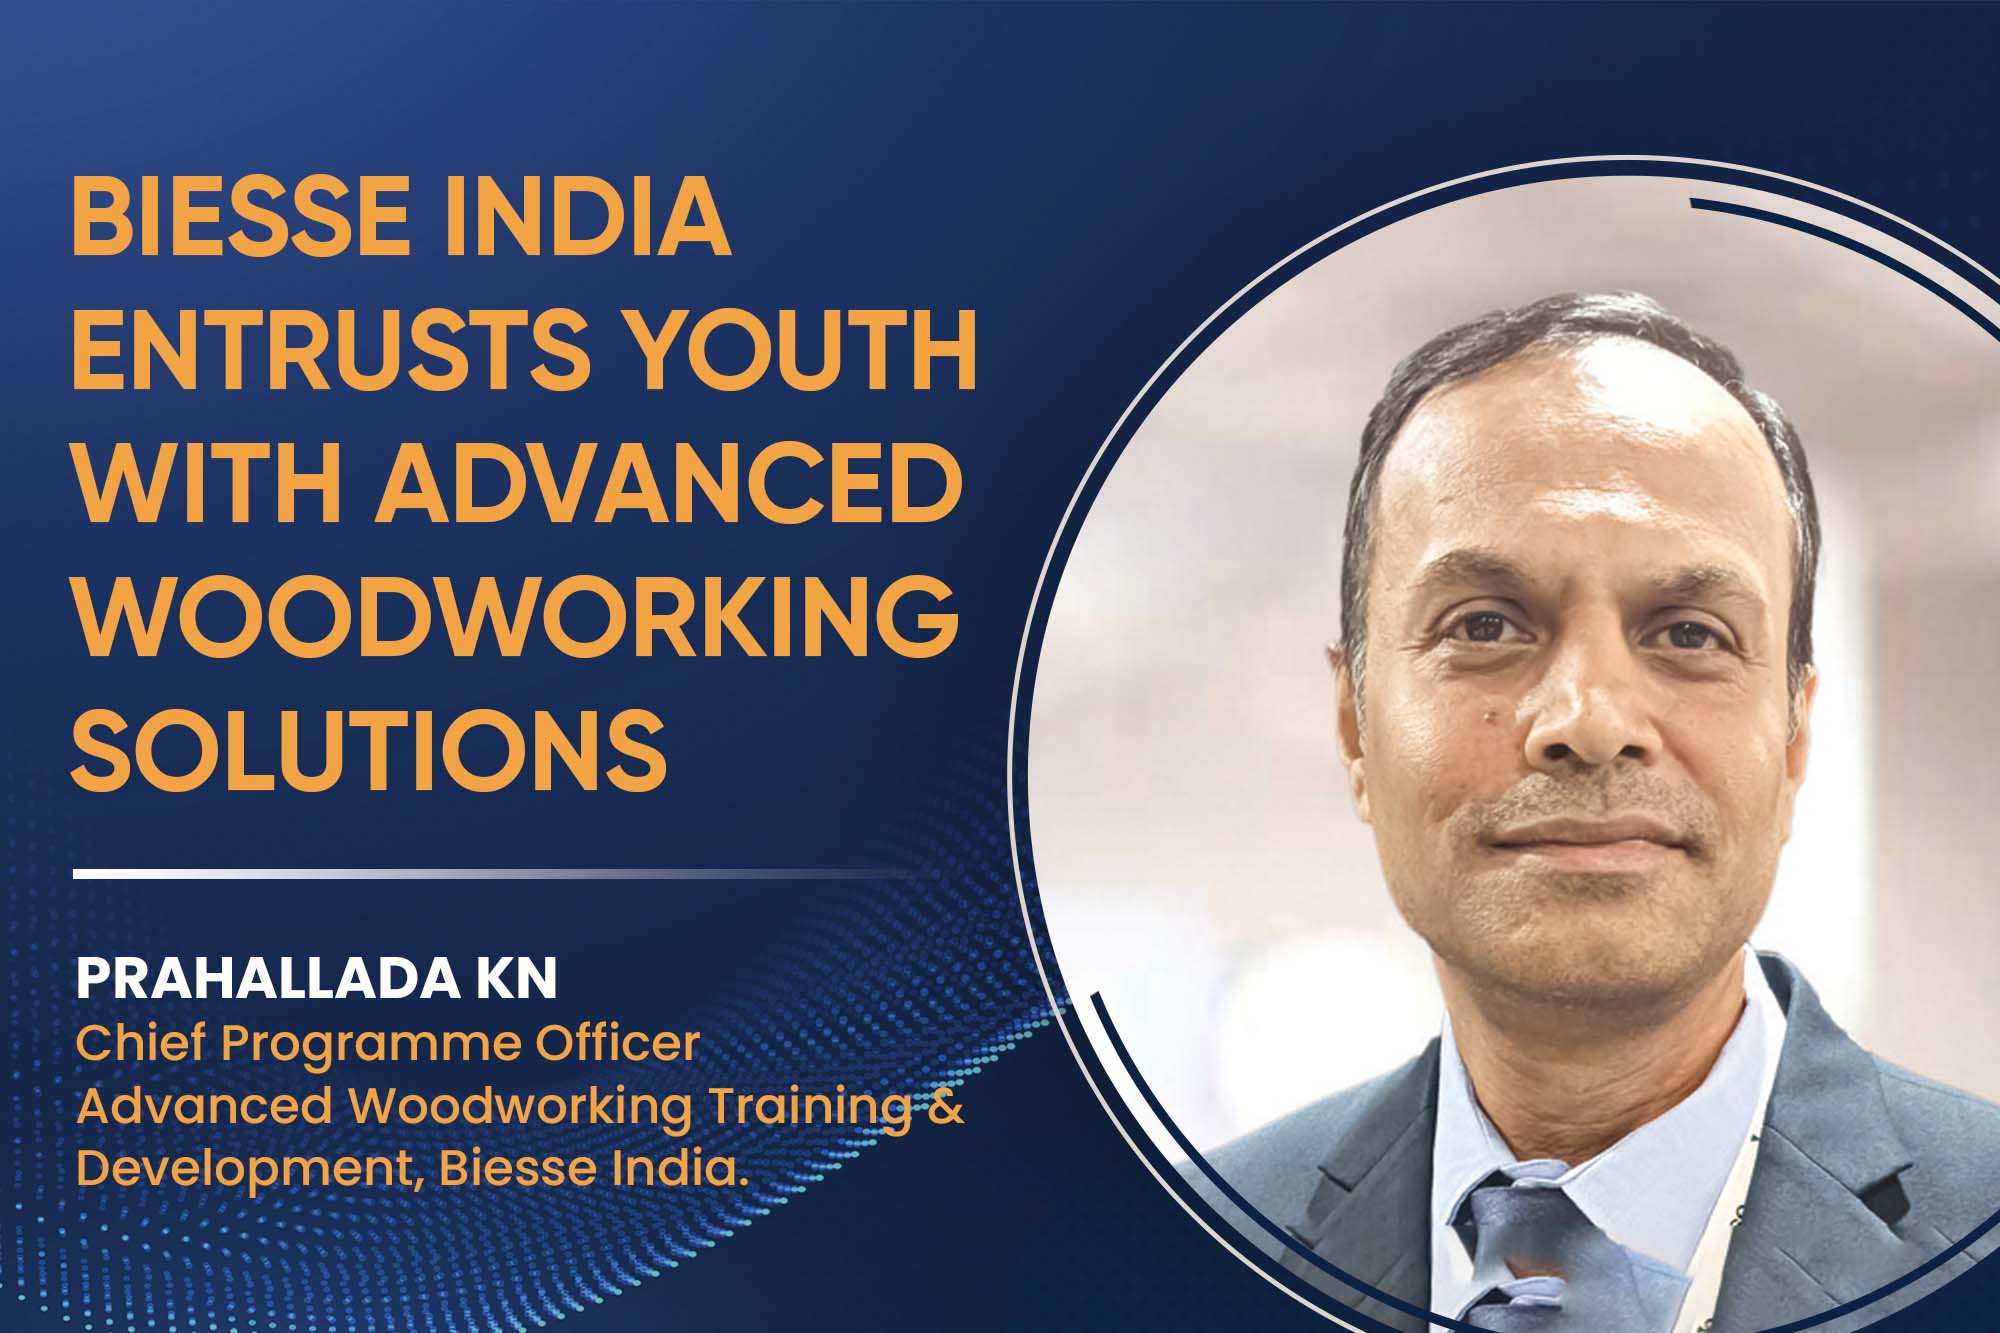 Biesse India entrusts youth with advanced woodworking solutions